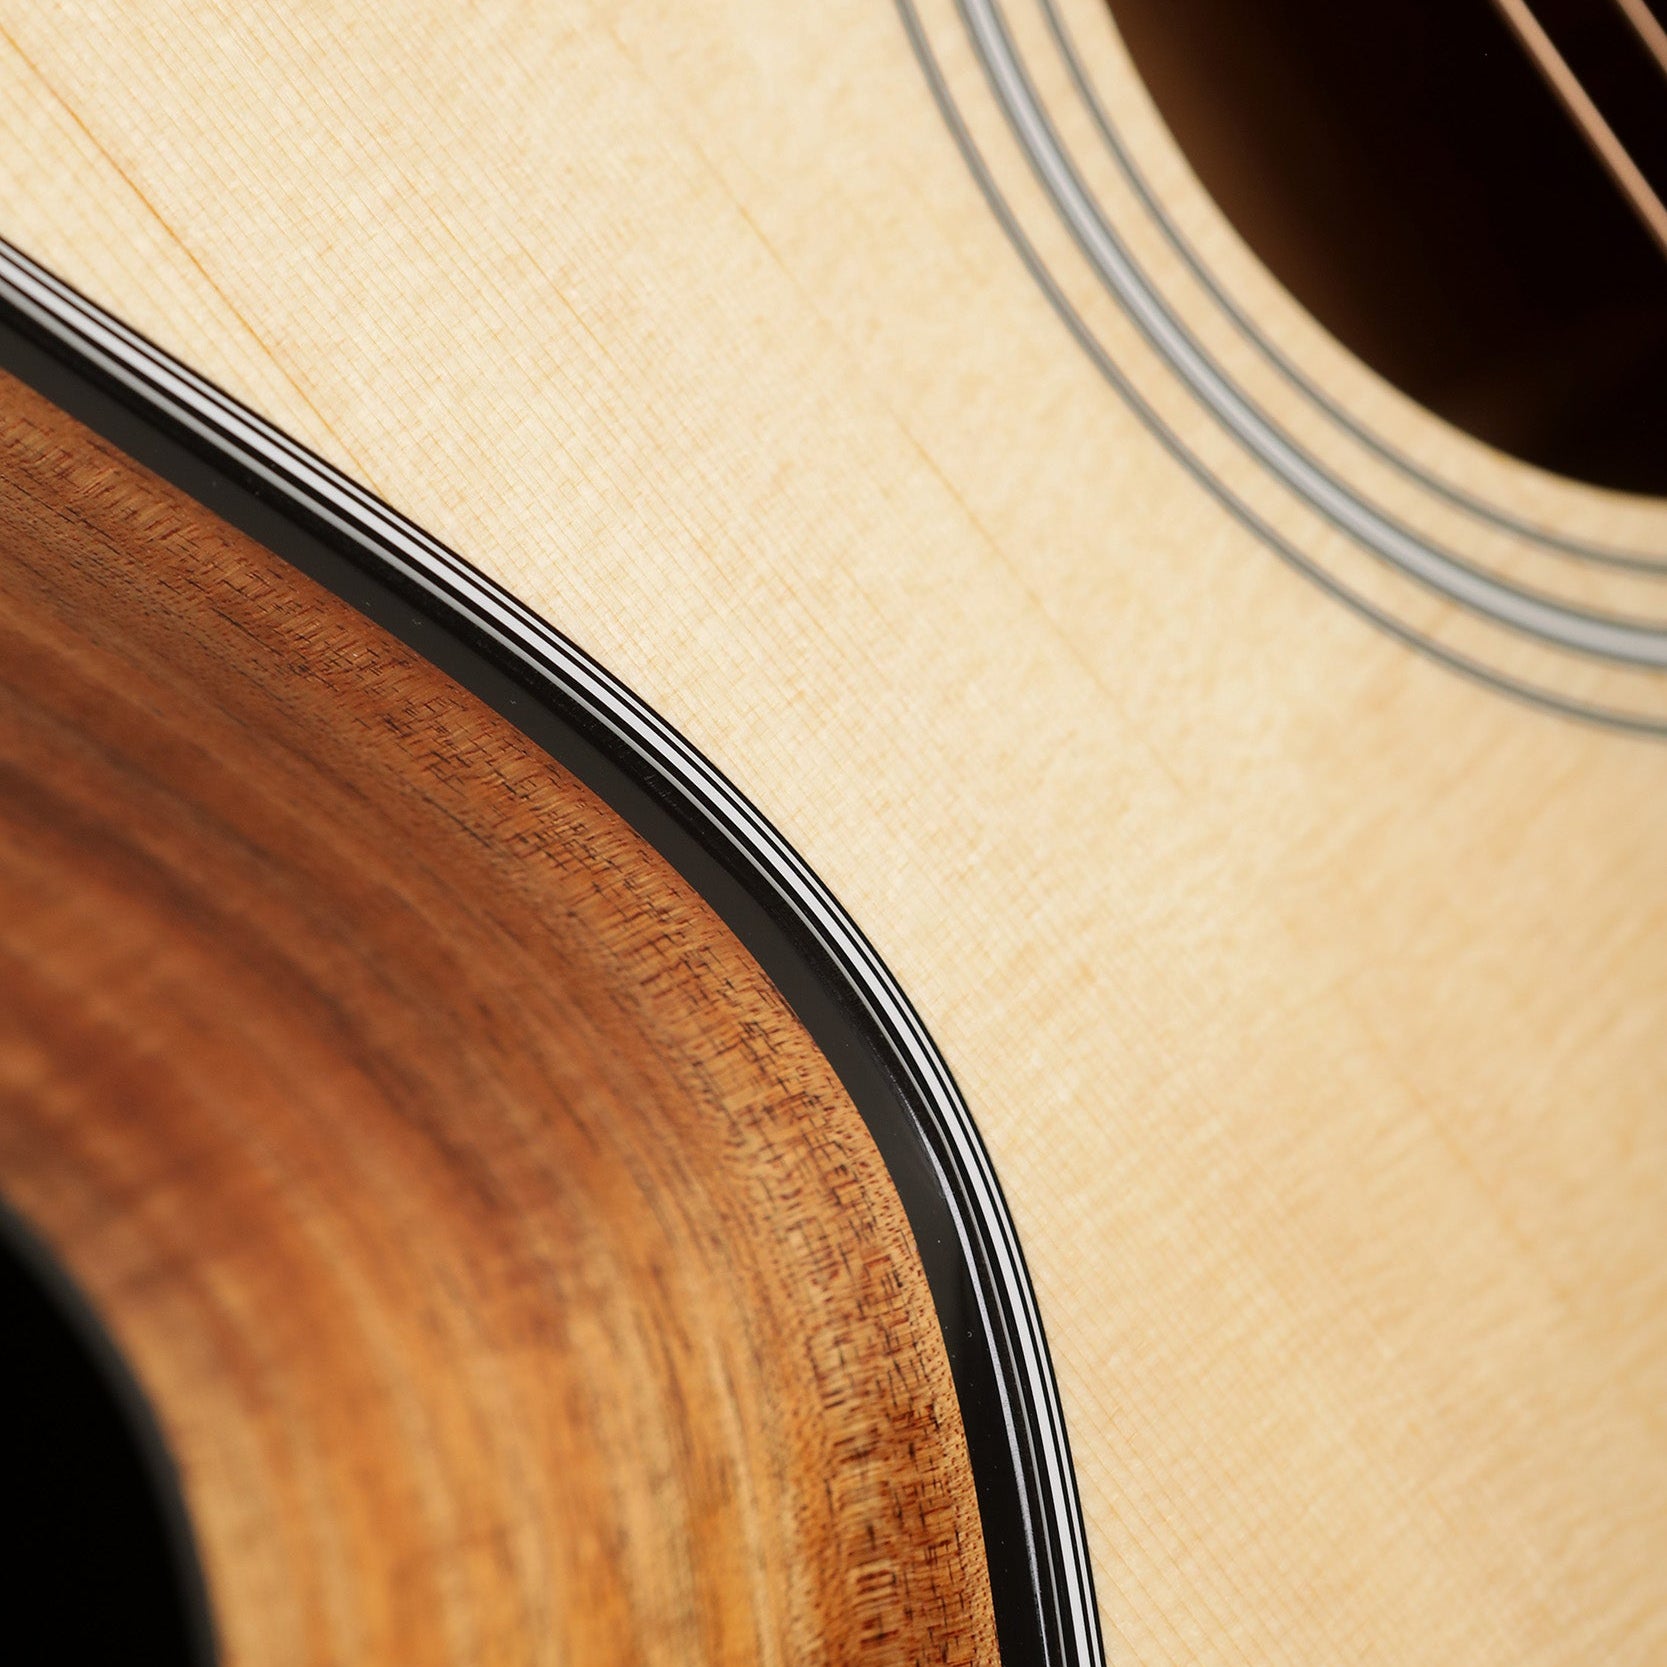 In Depth: The Taylor 314ce AC-LTD Limited Edition